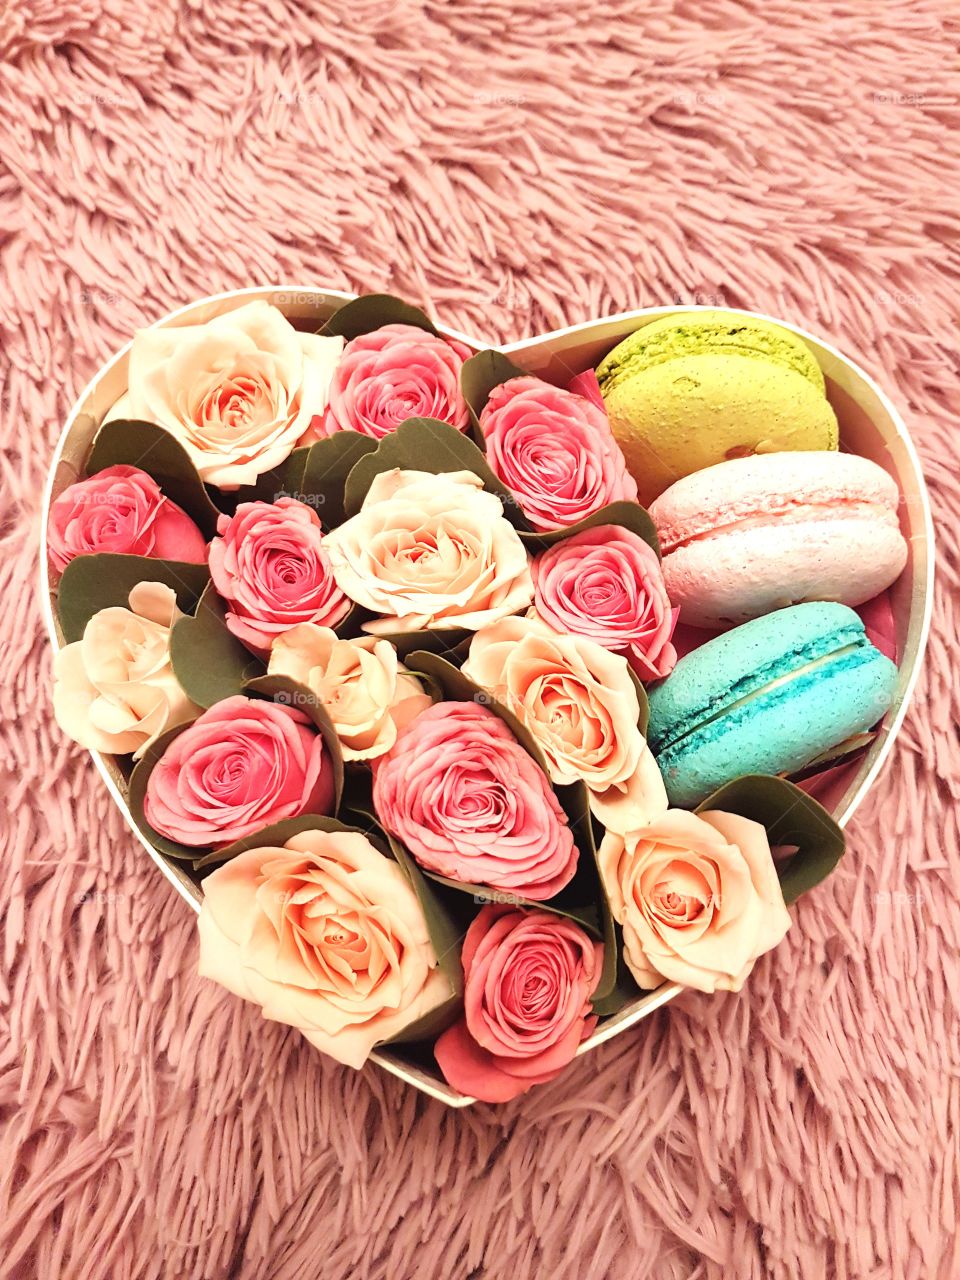 Box with roses and macaroni biscuits